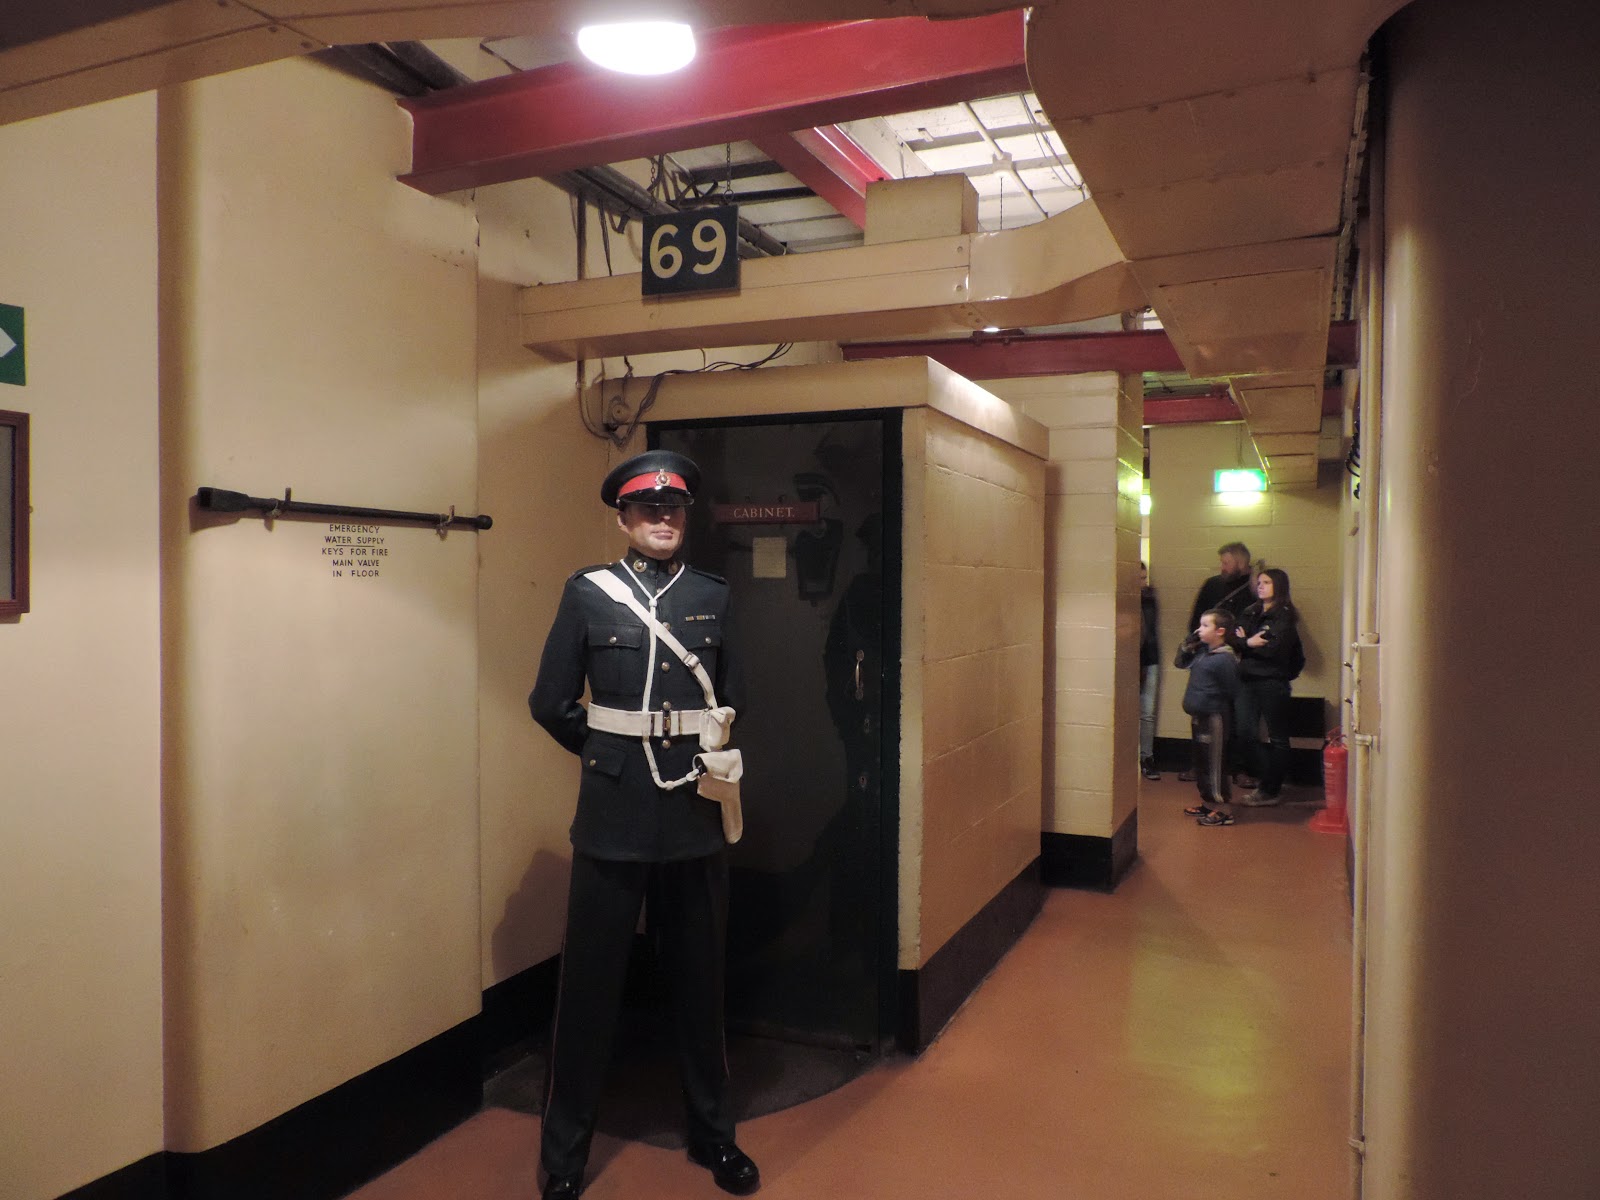 churchill war rooms whitehall london bunker imperial war museums